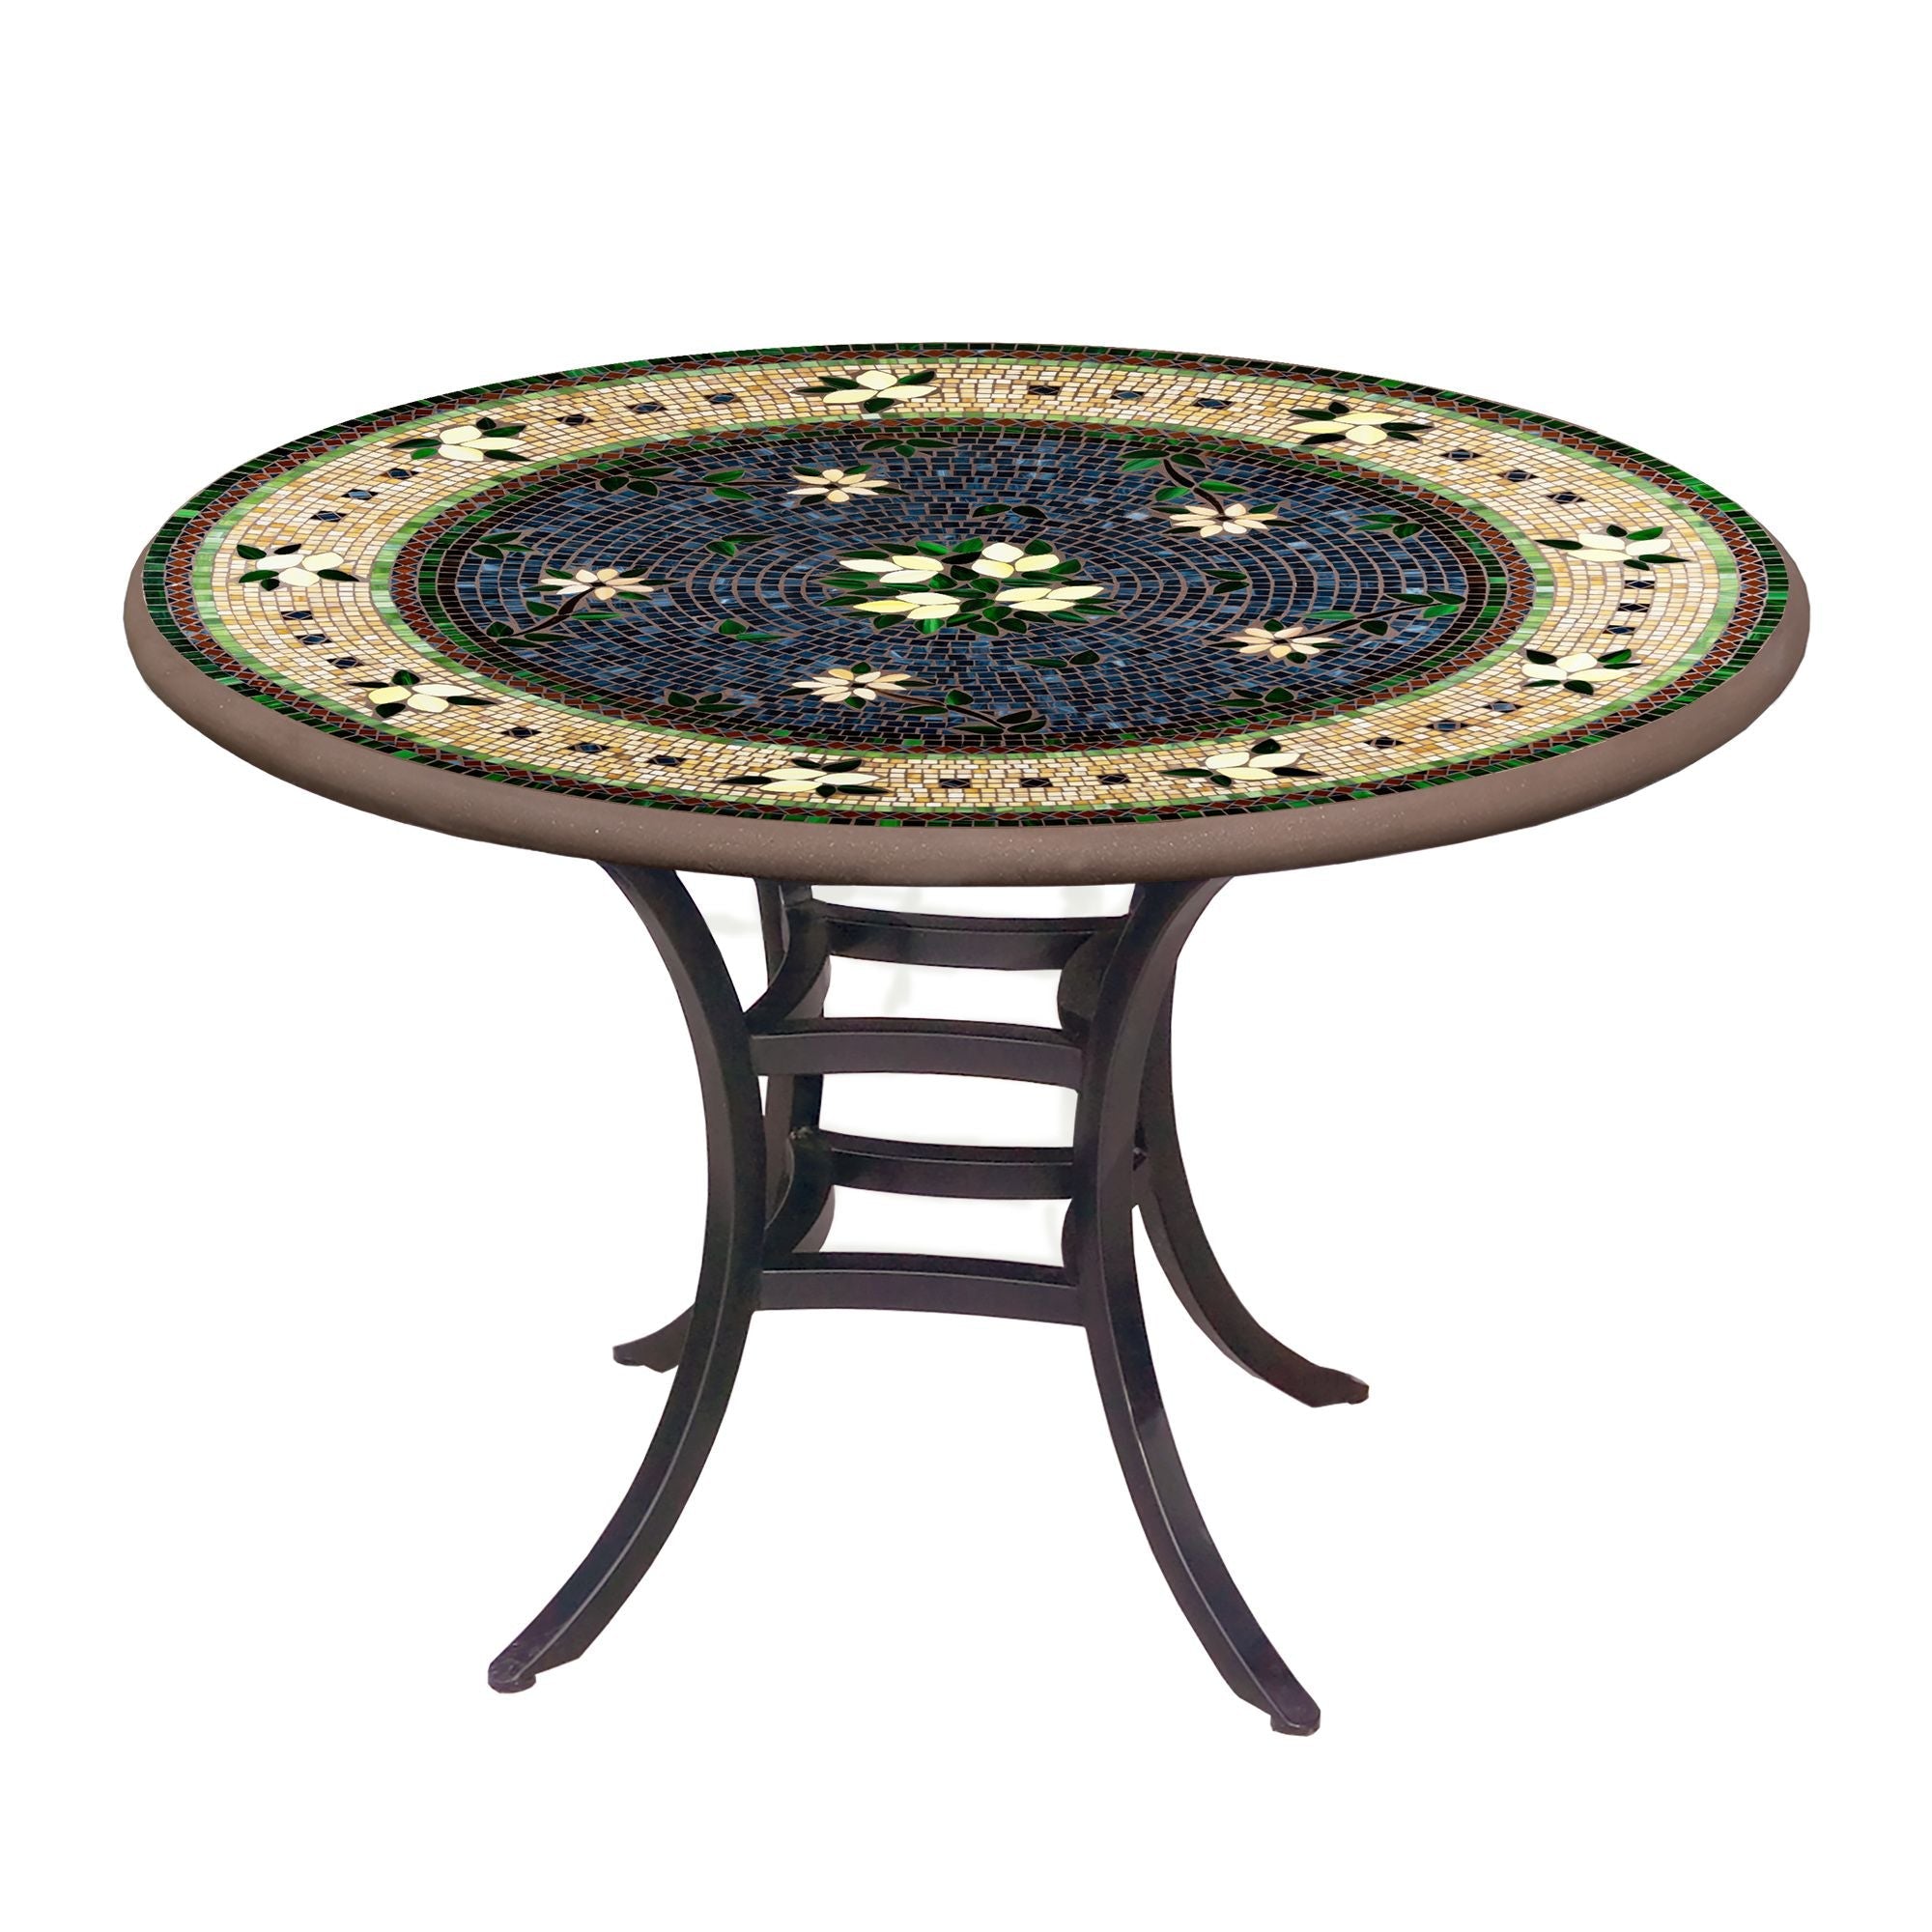 Tuscan Lemons Mosaic Patio Table-Iron Accents